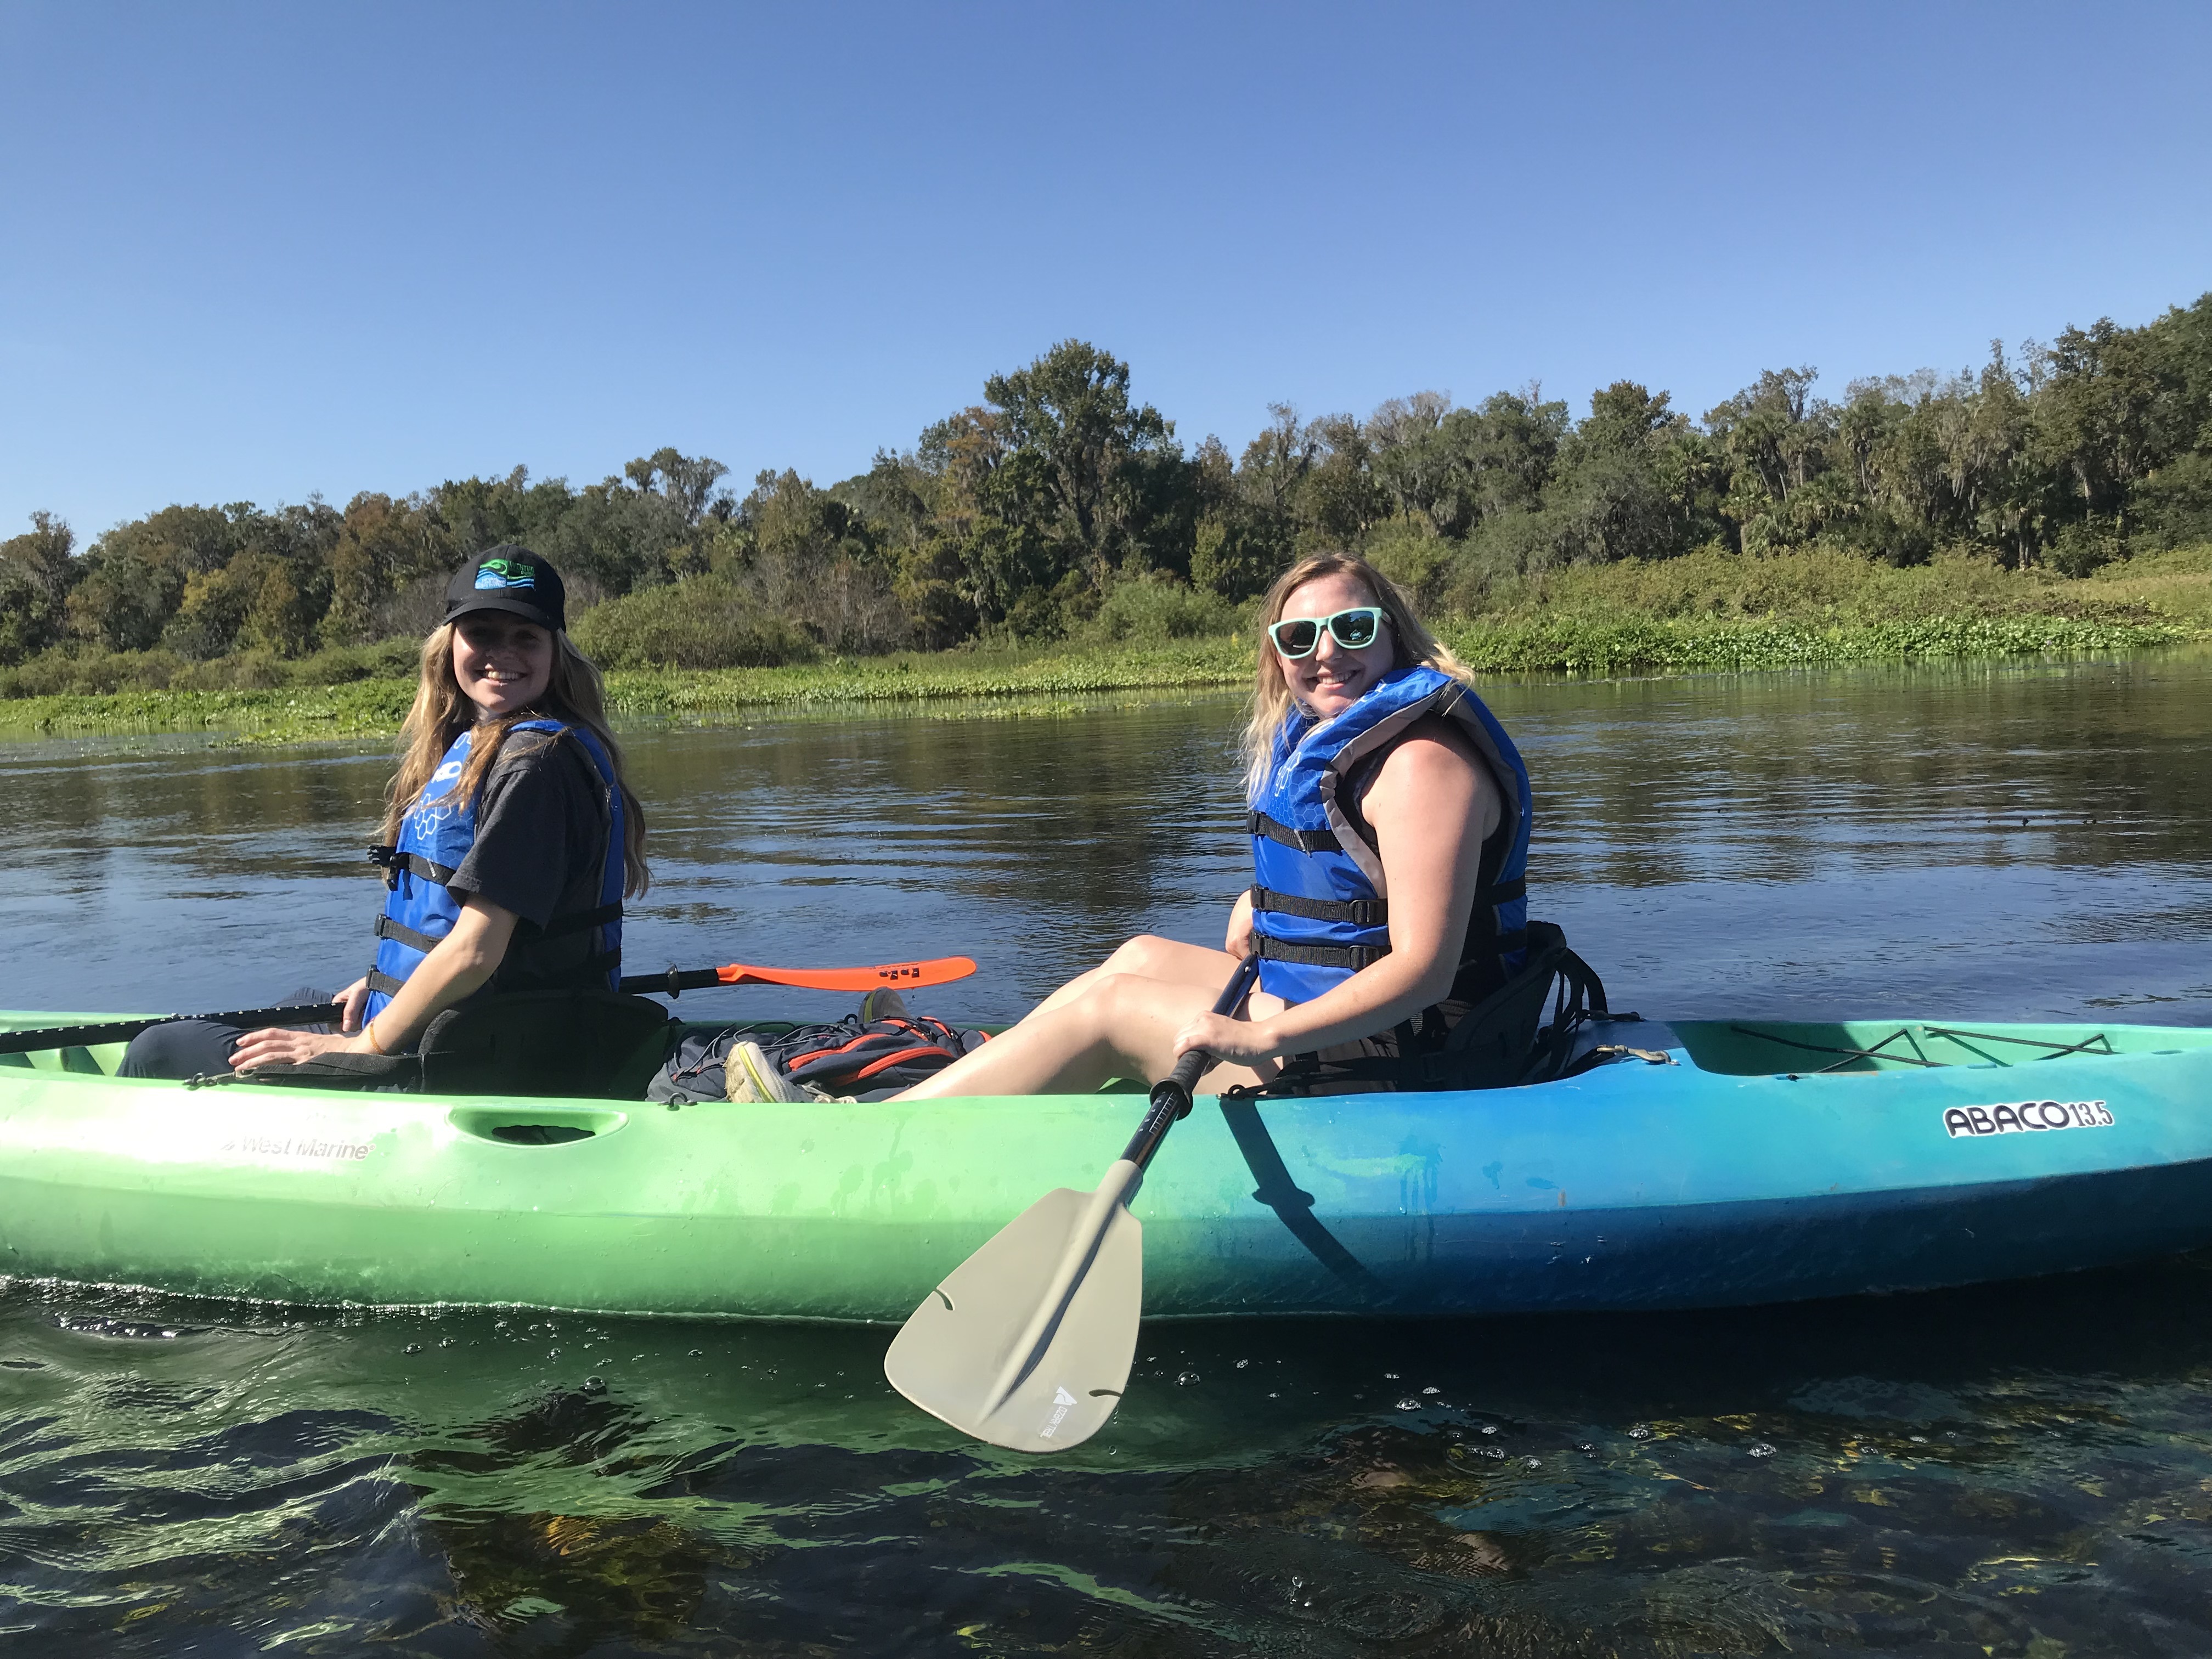 Kat Finck and Katie Taylor on a site visit to Wekiva Wild & Scenic River